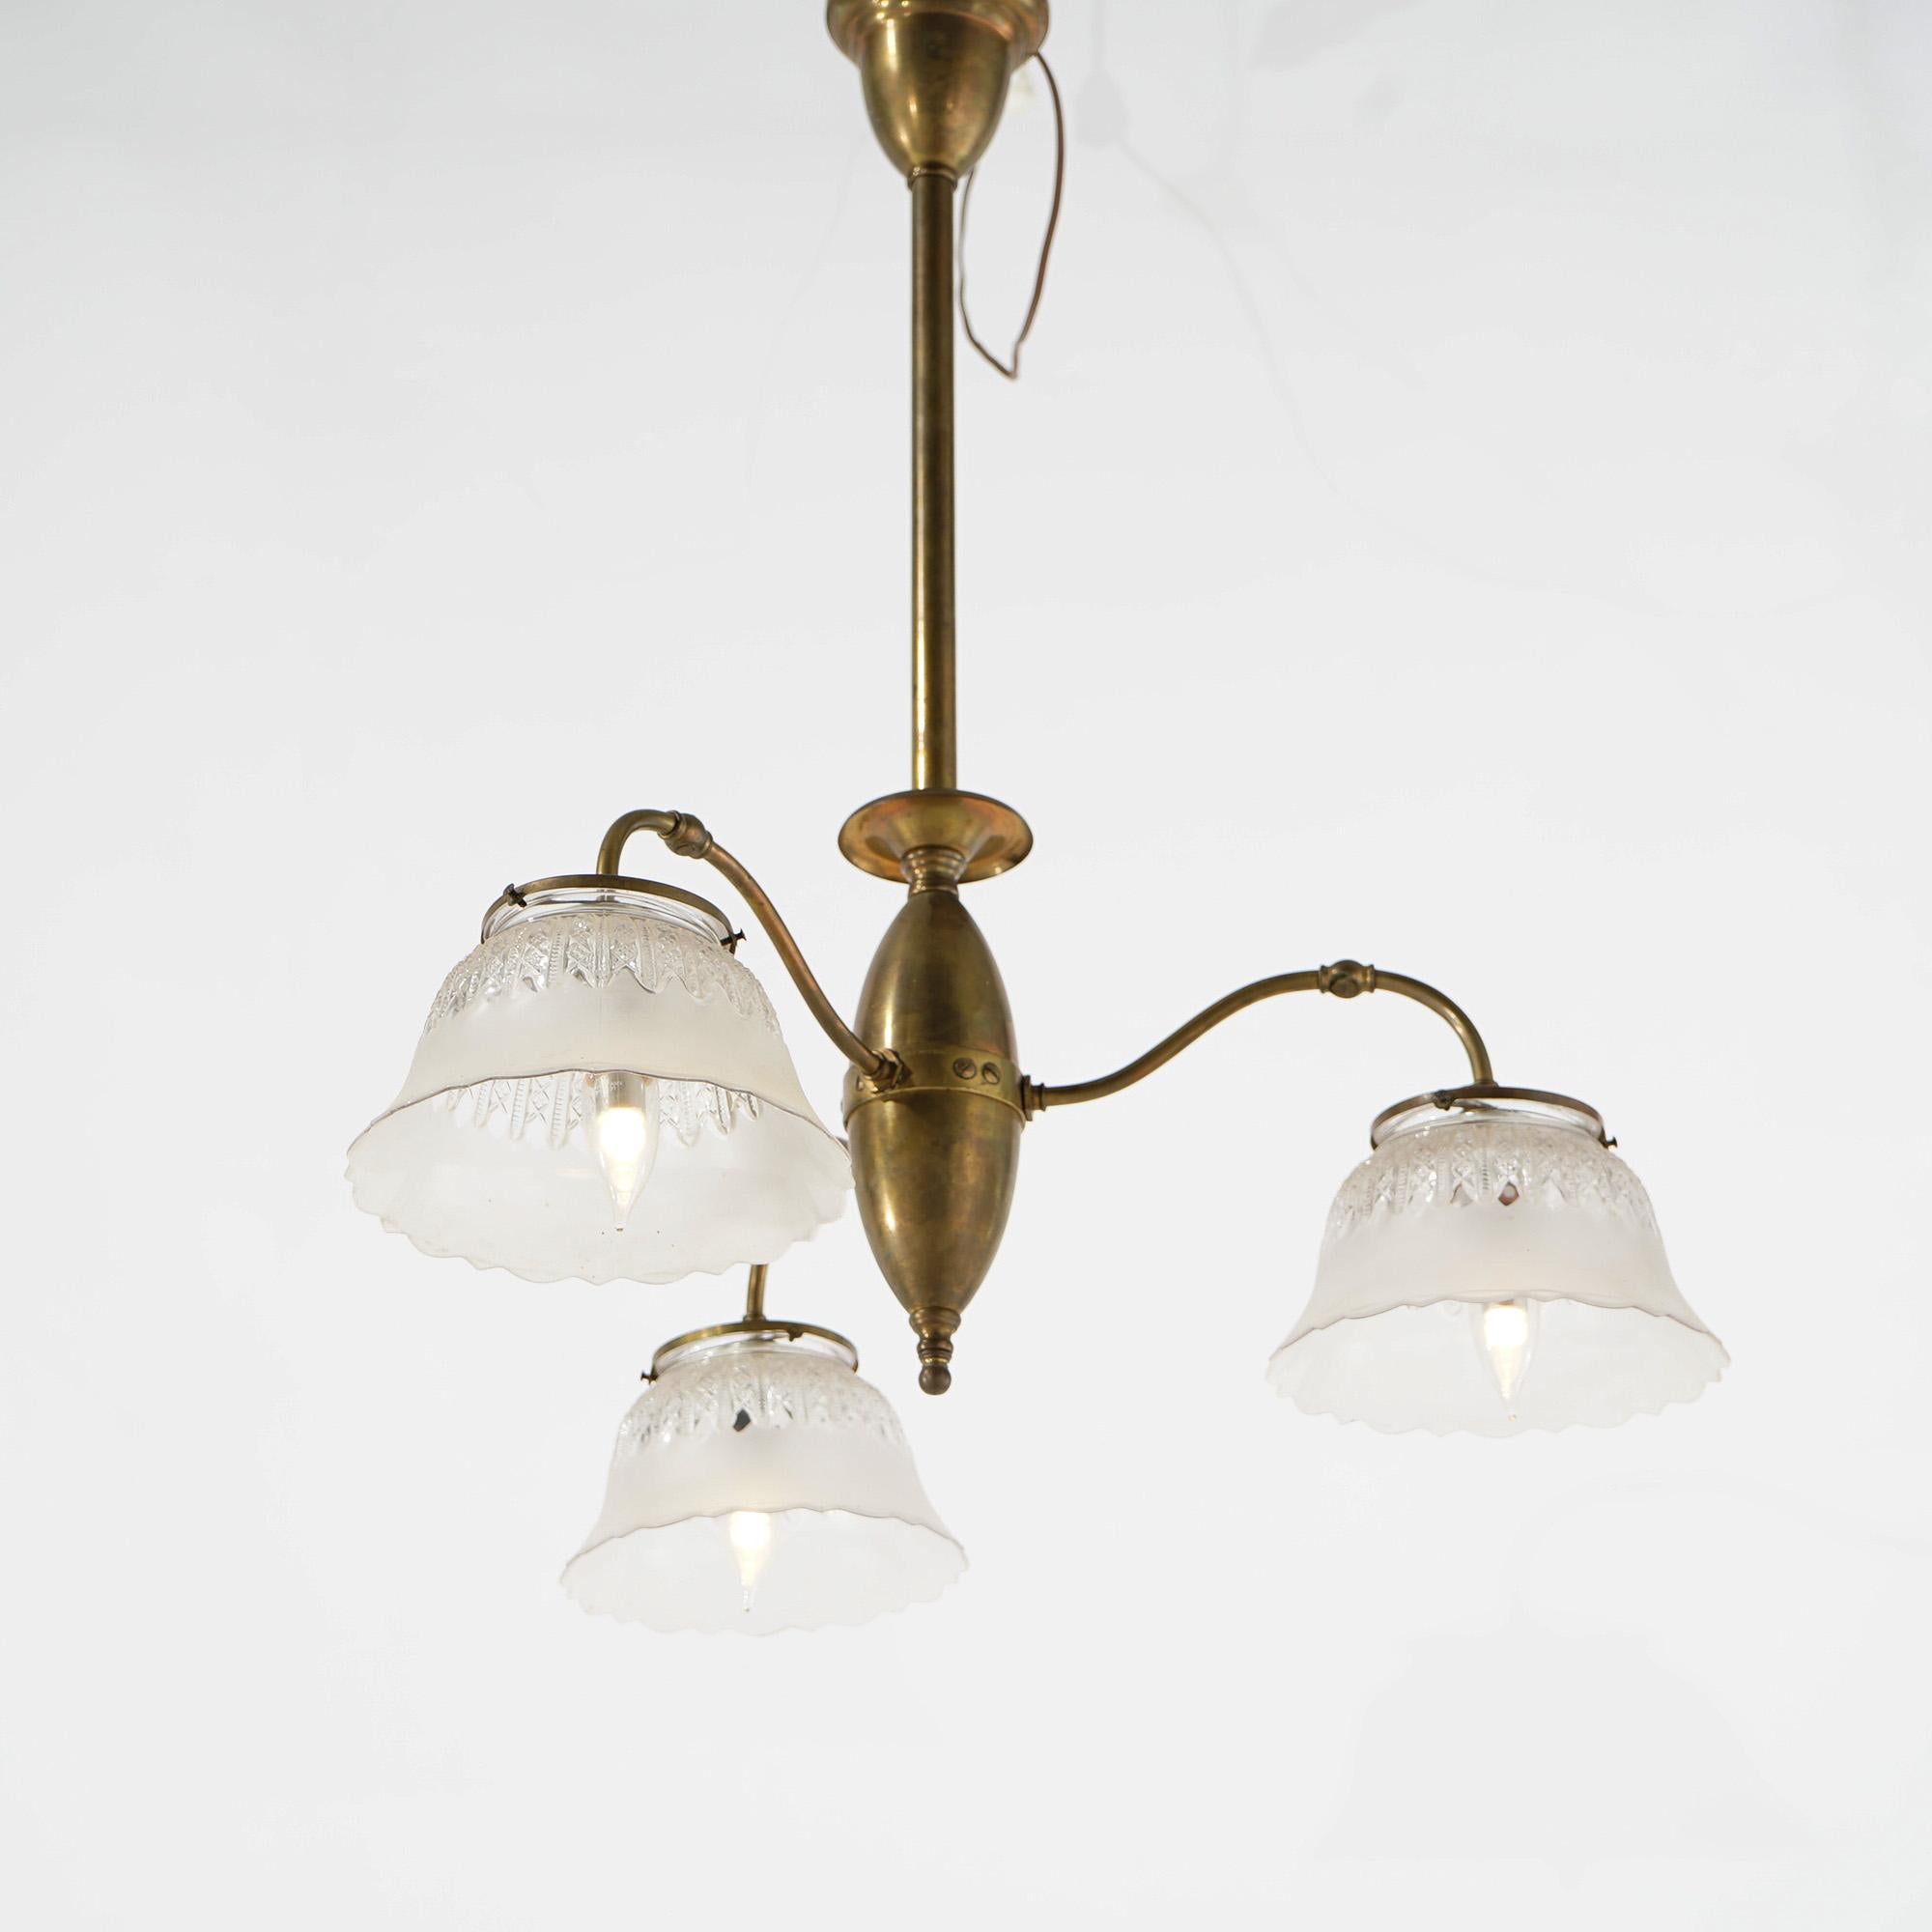 19th Century Antique Victorian Three-Light Brass & Glass Early Electric Fixture, 19th C